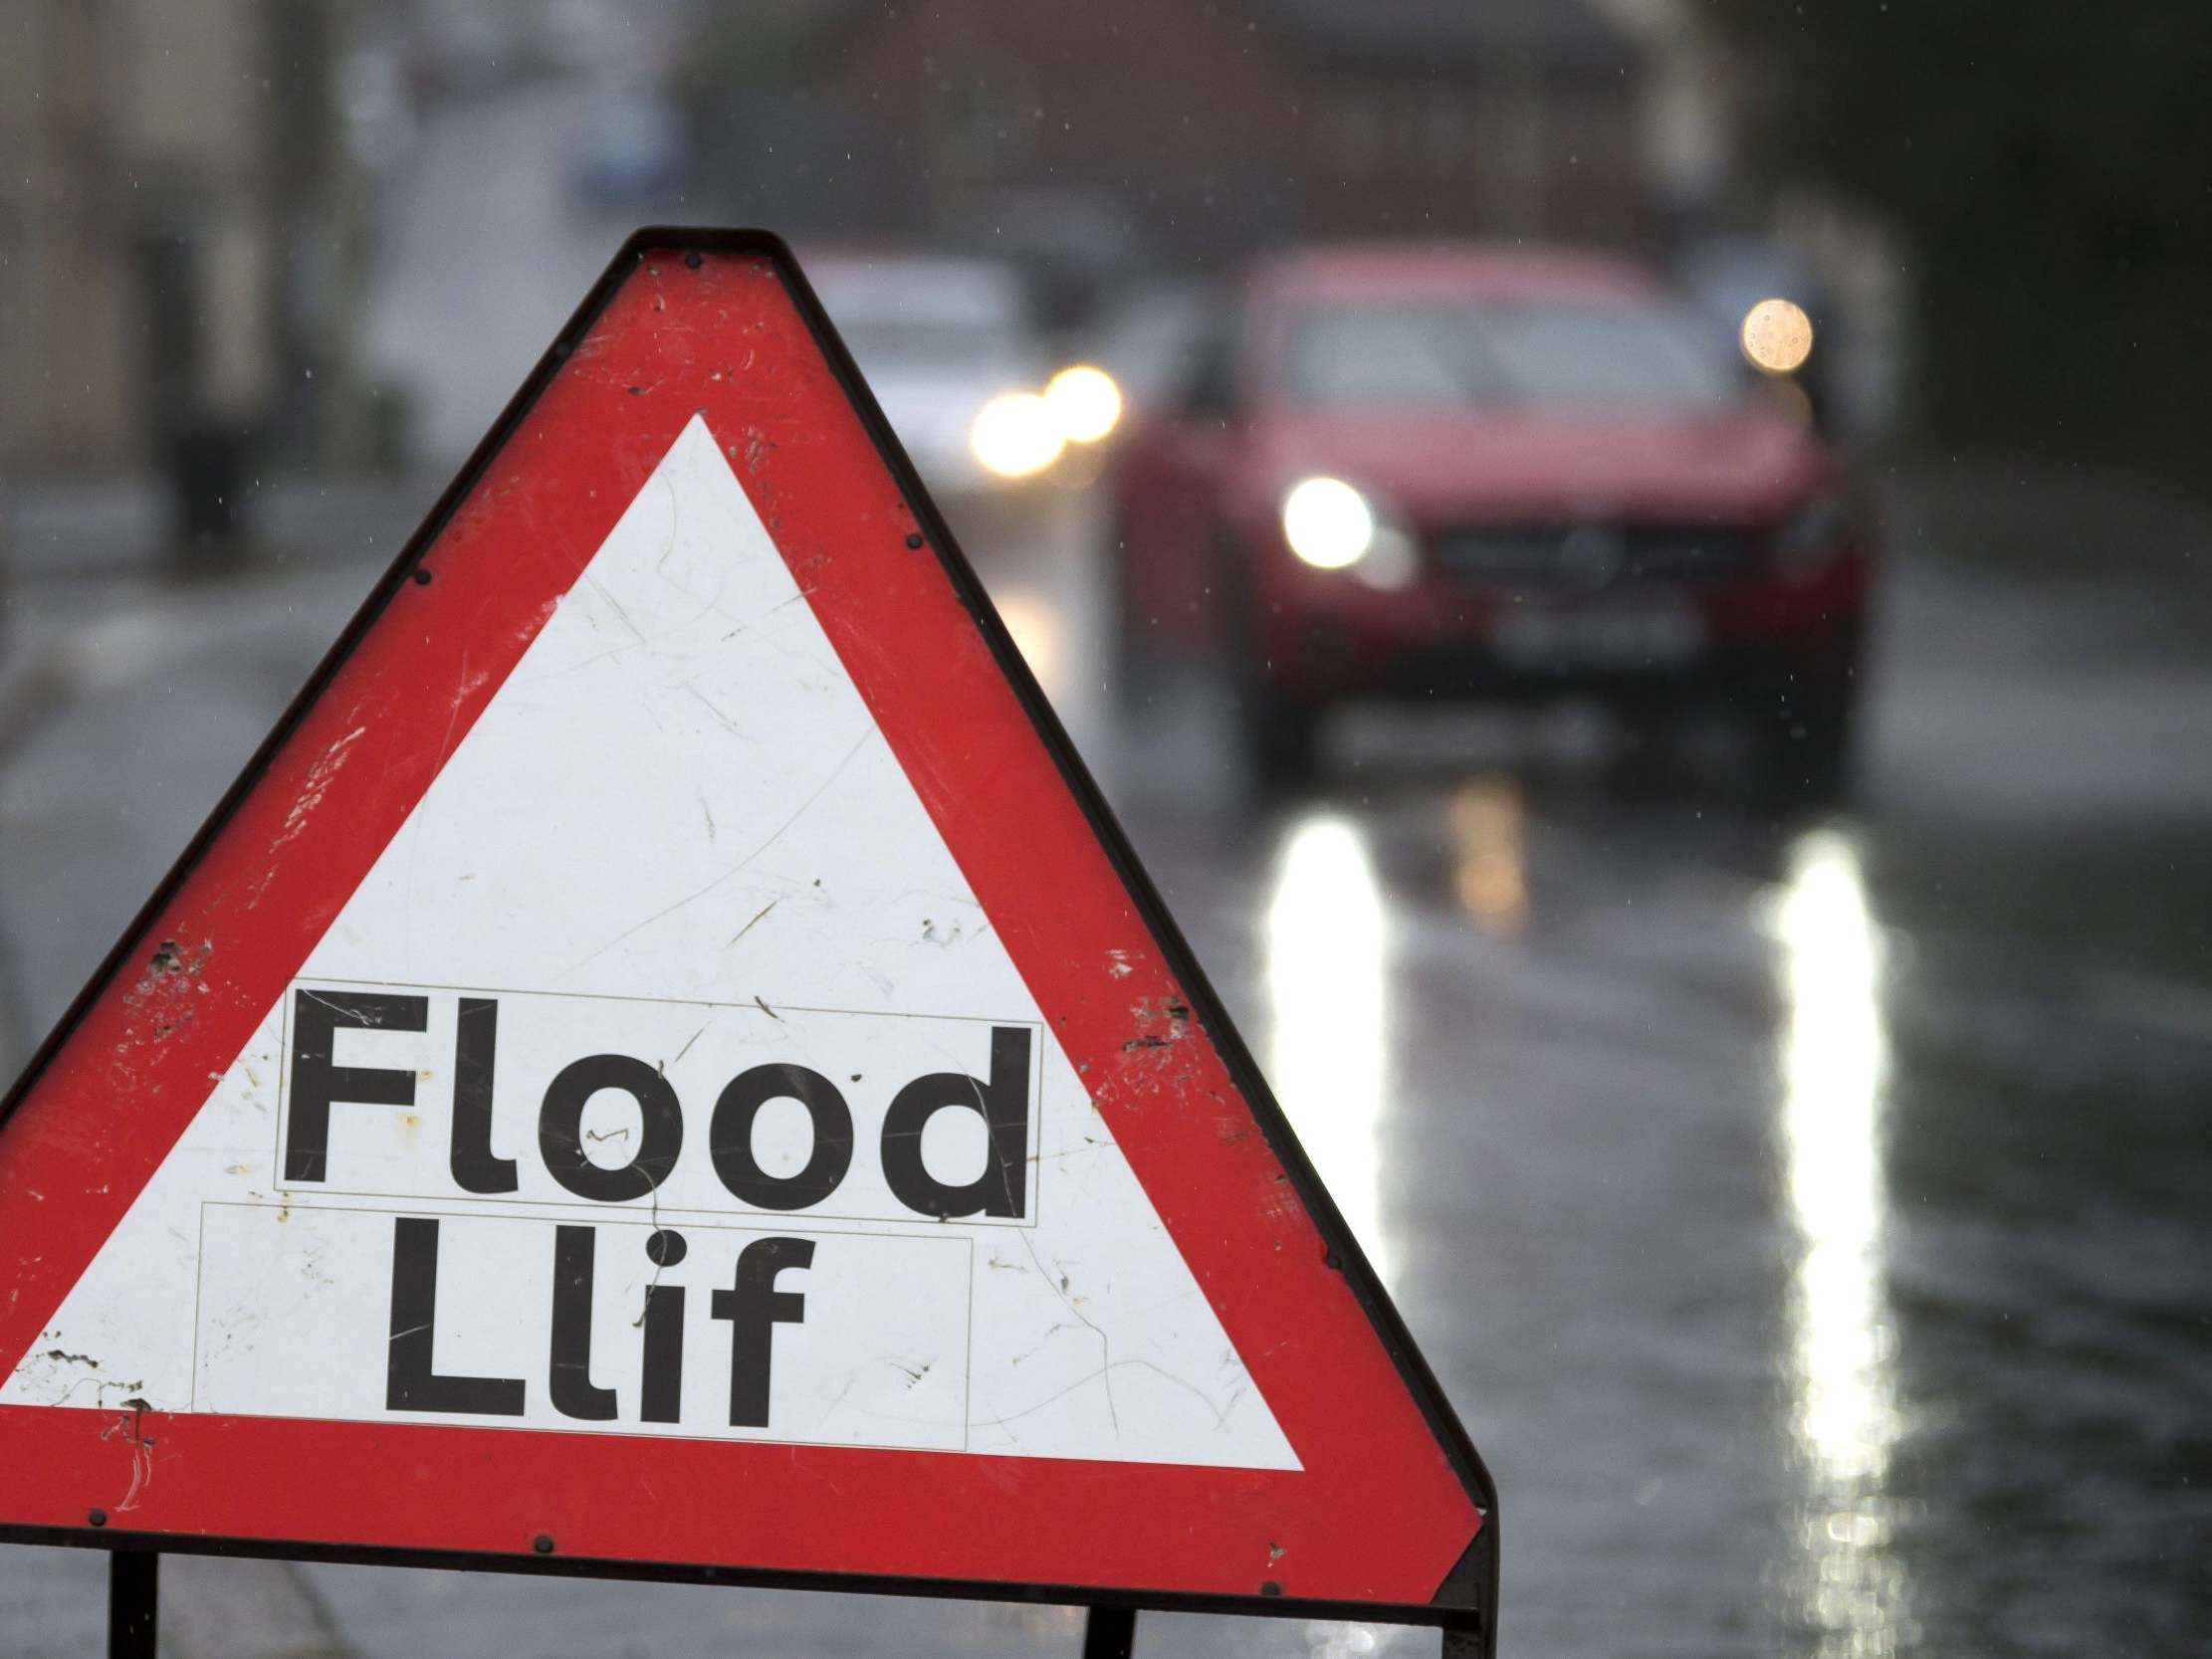 Flood warning signs were put out in Pontypridd, Wales, after the Met Office issued a yellow weather warning